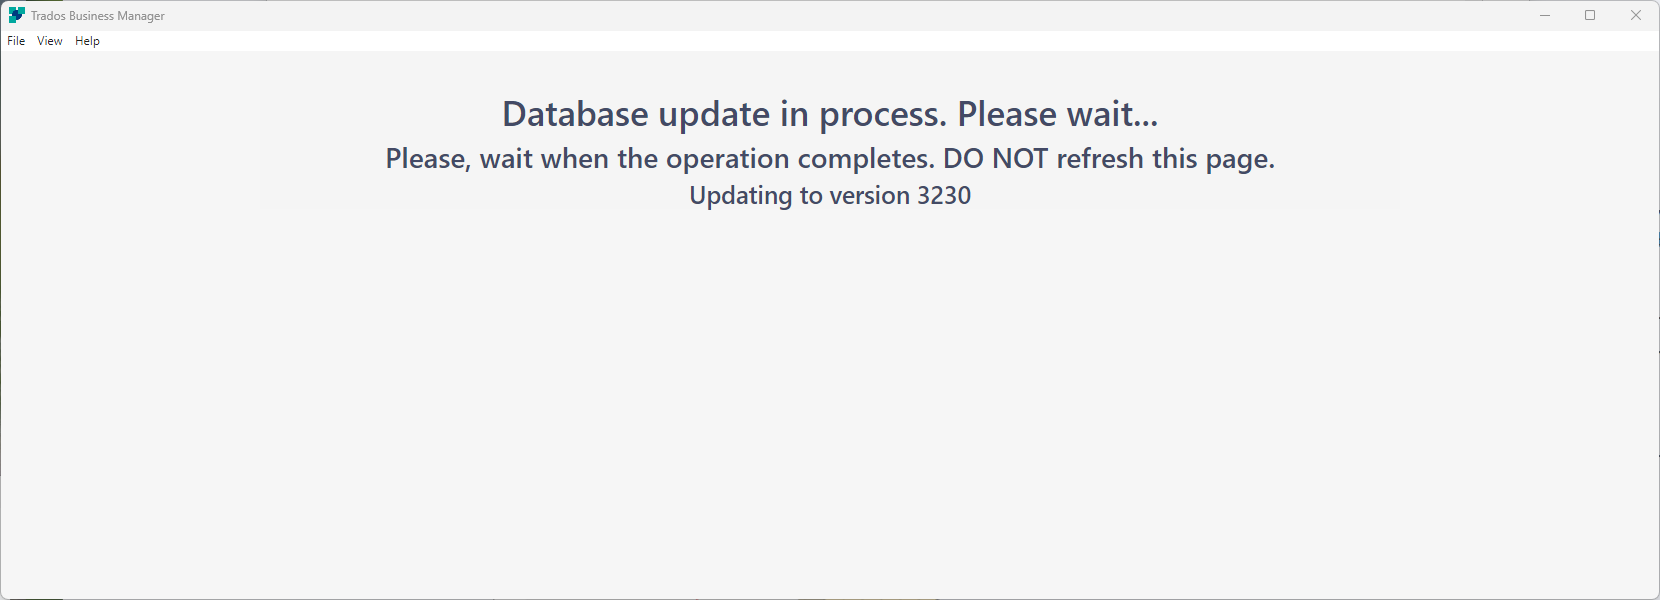 Trados Business Manager screen displaying a message 'Database update in process. Please wait... Please, wait when the operation completes. DO NOT refresh this page. Updating to version 3230'